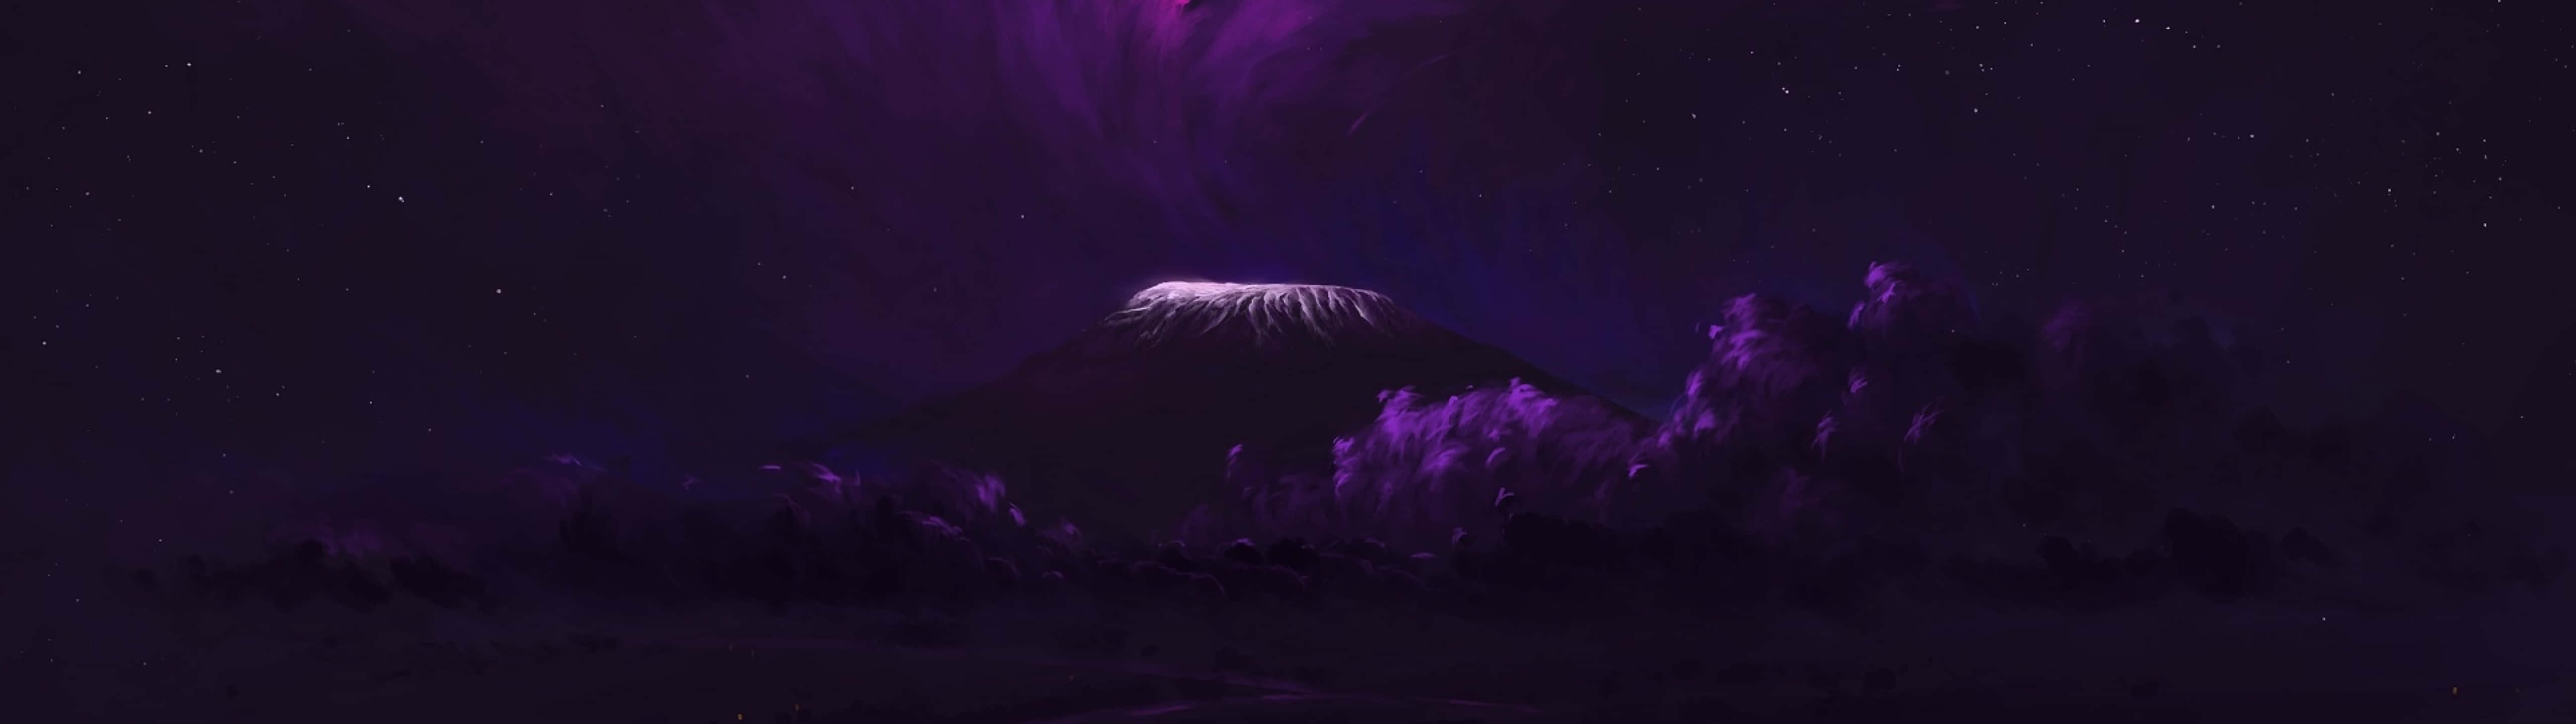 Download A Purple Mountain With A Purple Light Shining On It Wallpaper